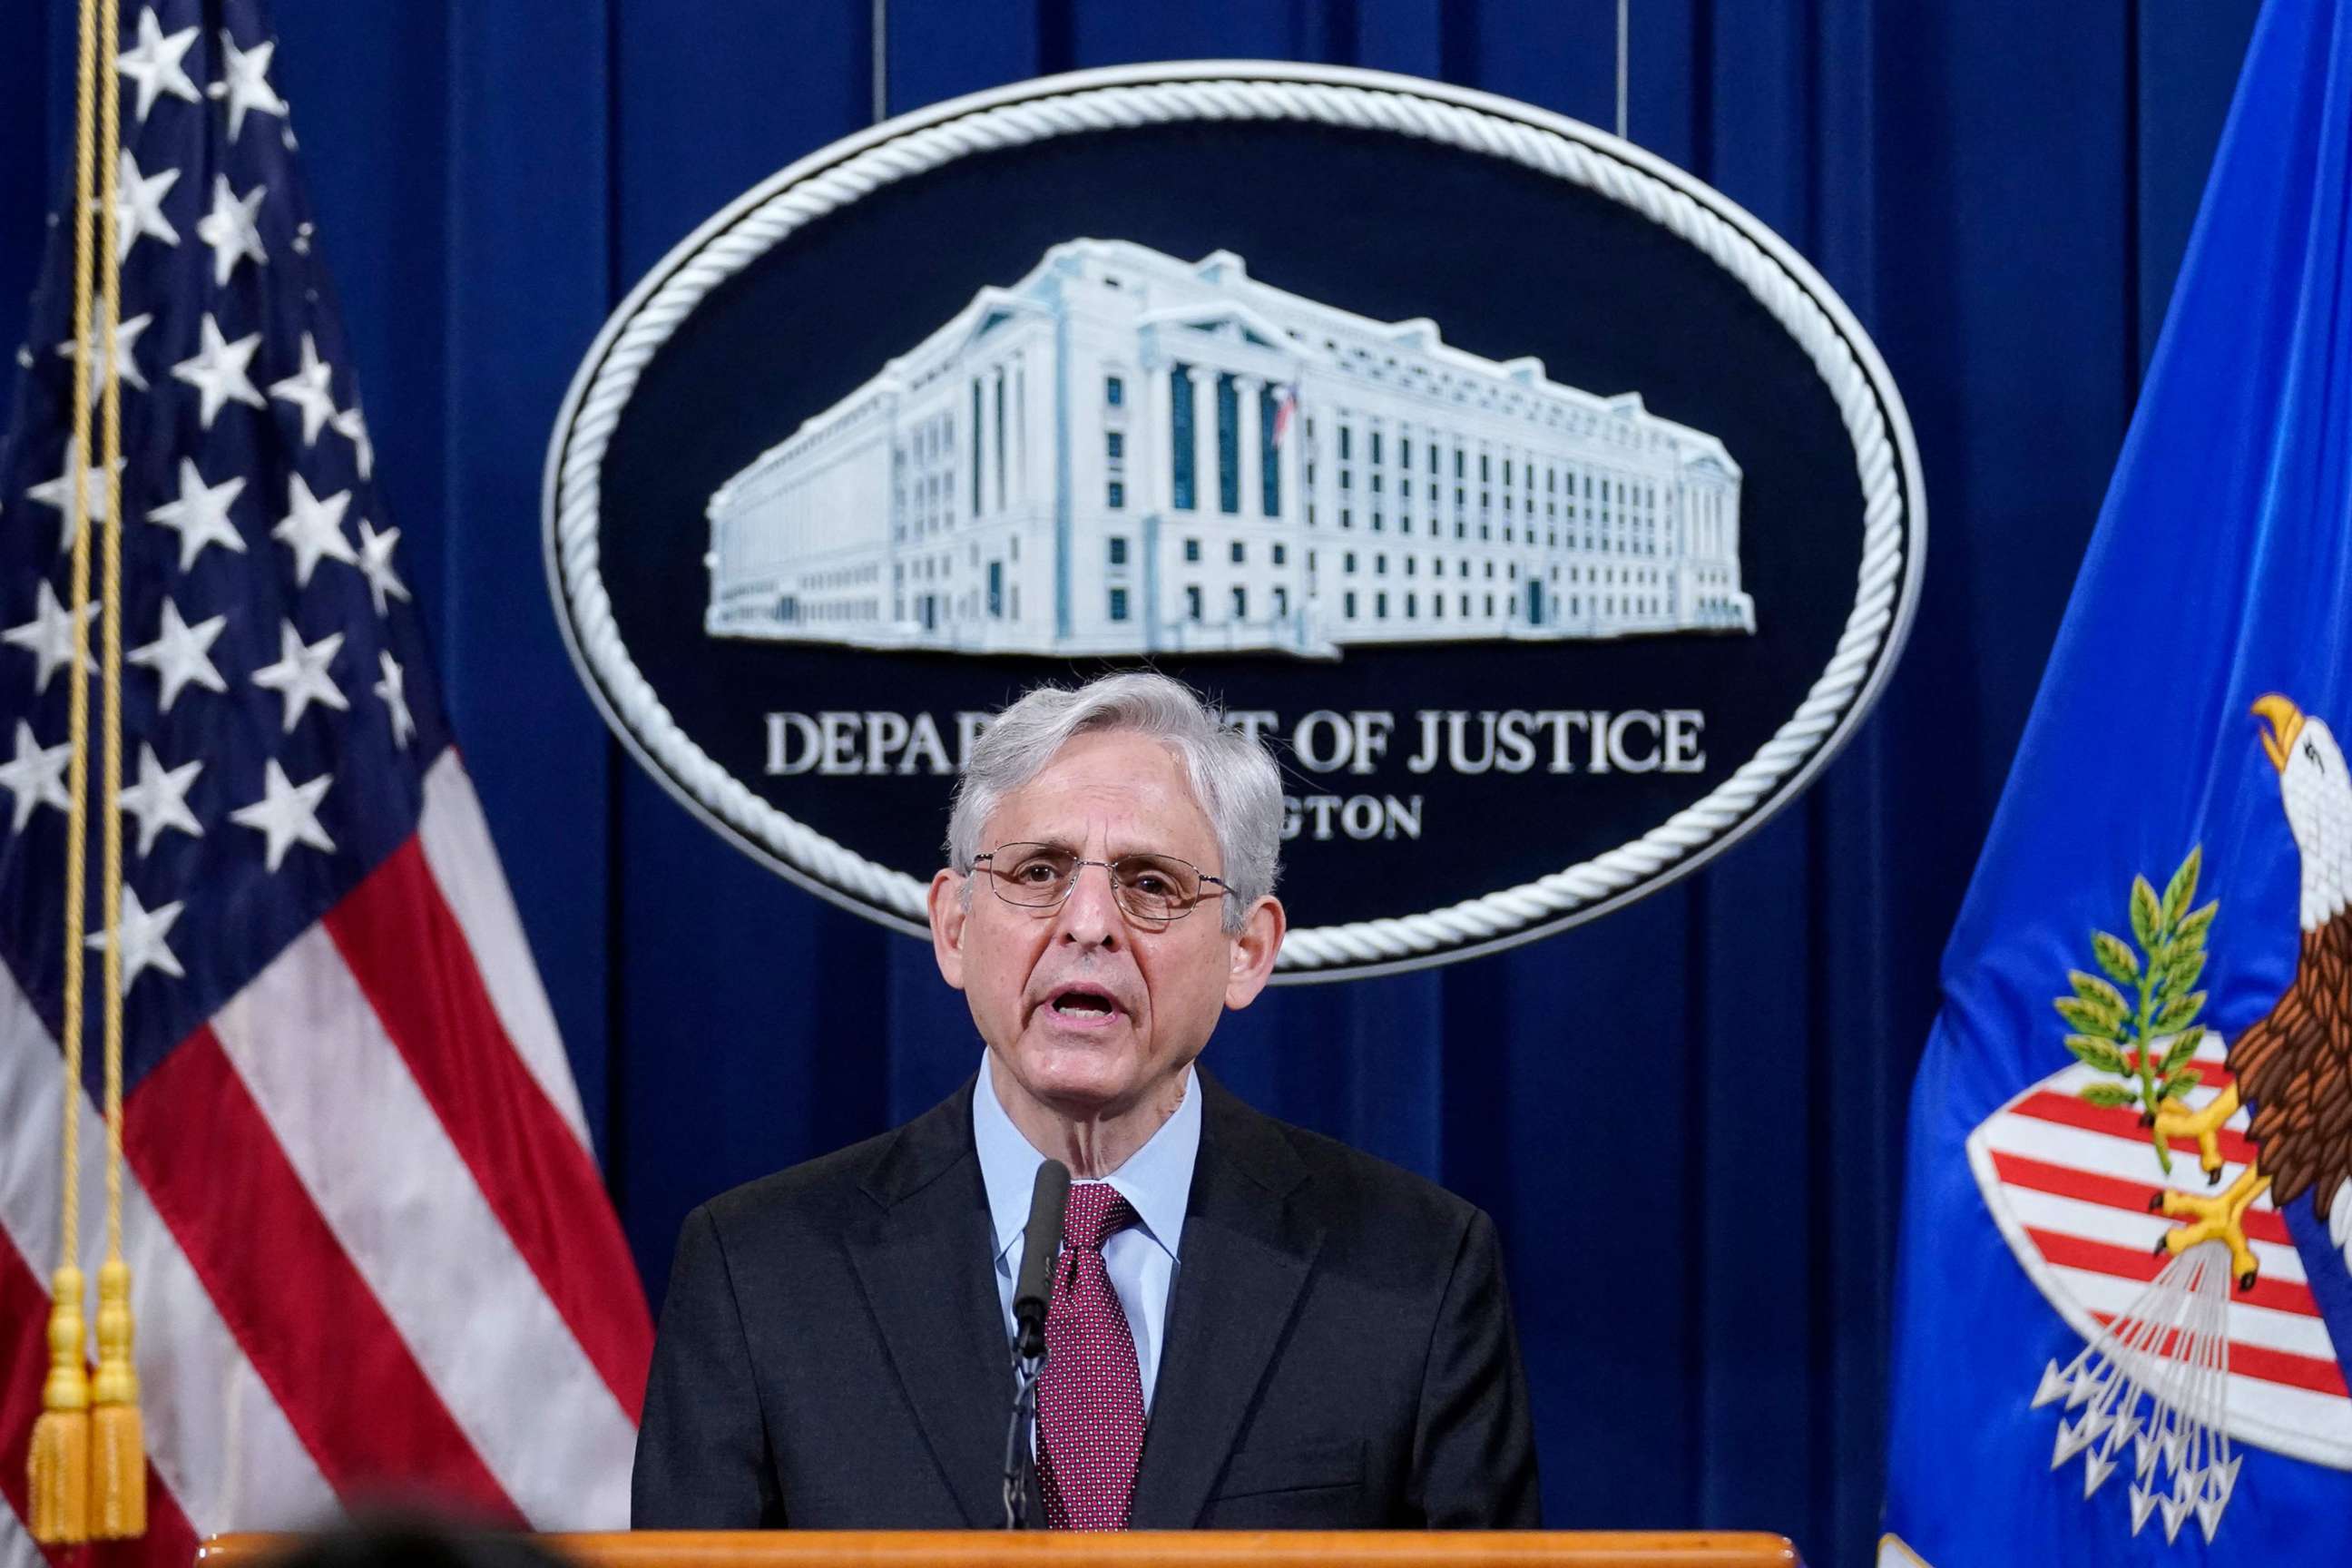 PHOTO: Attorney General Merrick Garland arrives to speak about a jury's verdict in the case against former Minneapolis Police Officer Derek Chauvin in the death of George Floyd, at the Department of Justice on April 21, 2021 in Washington, D.C.